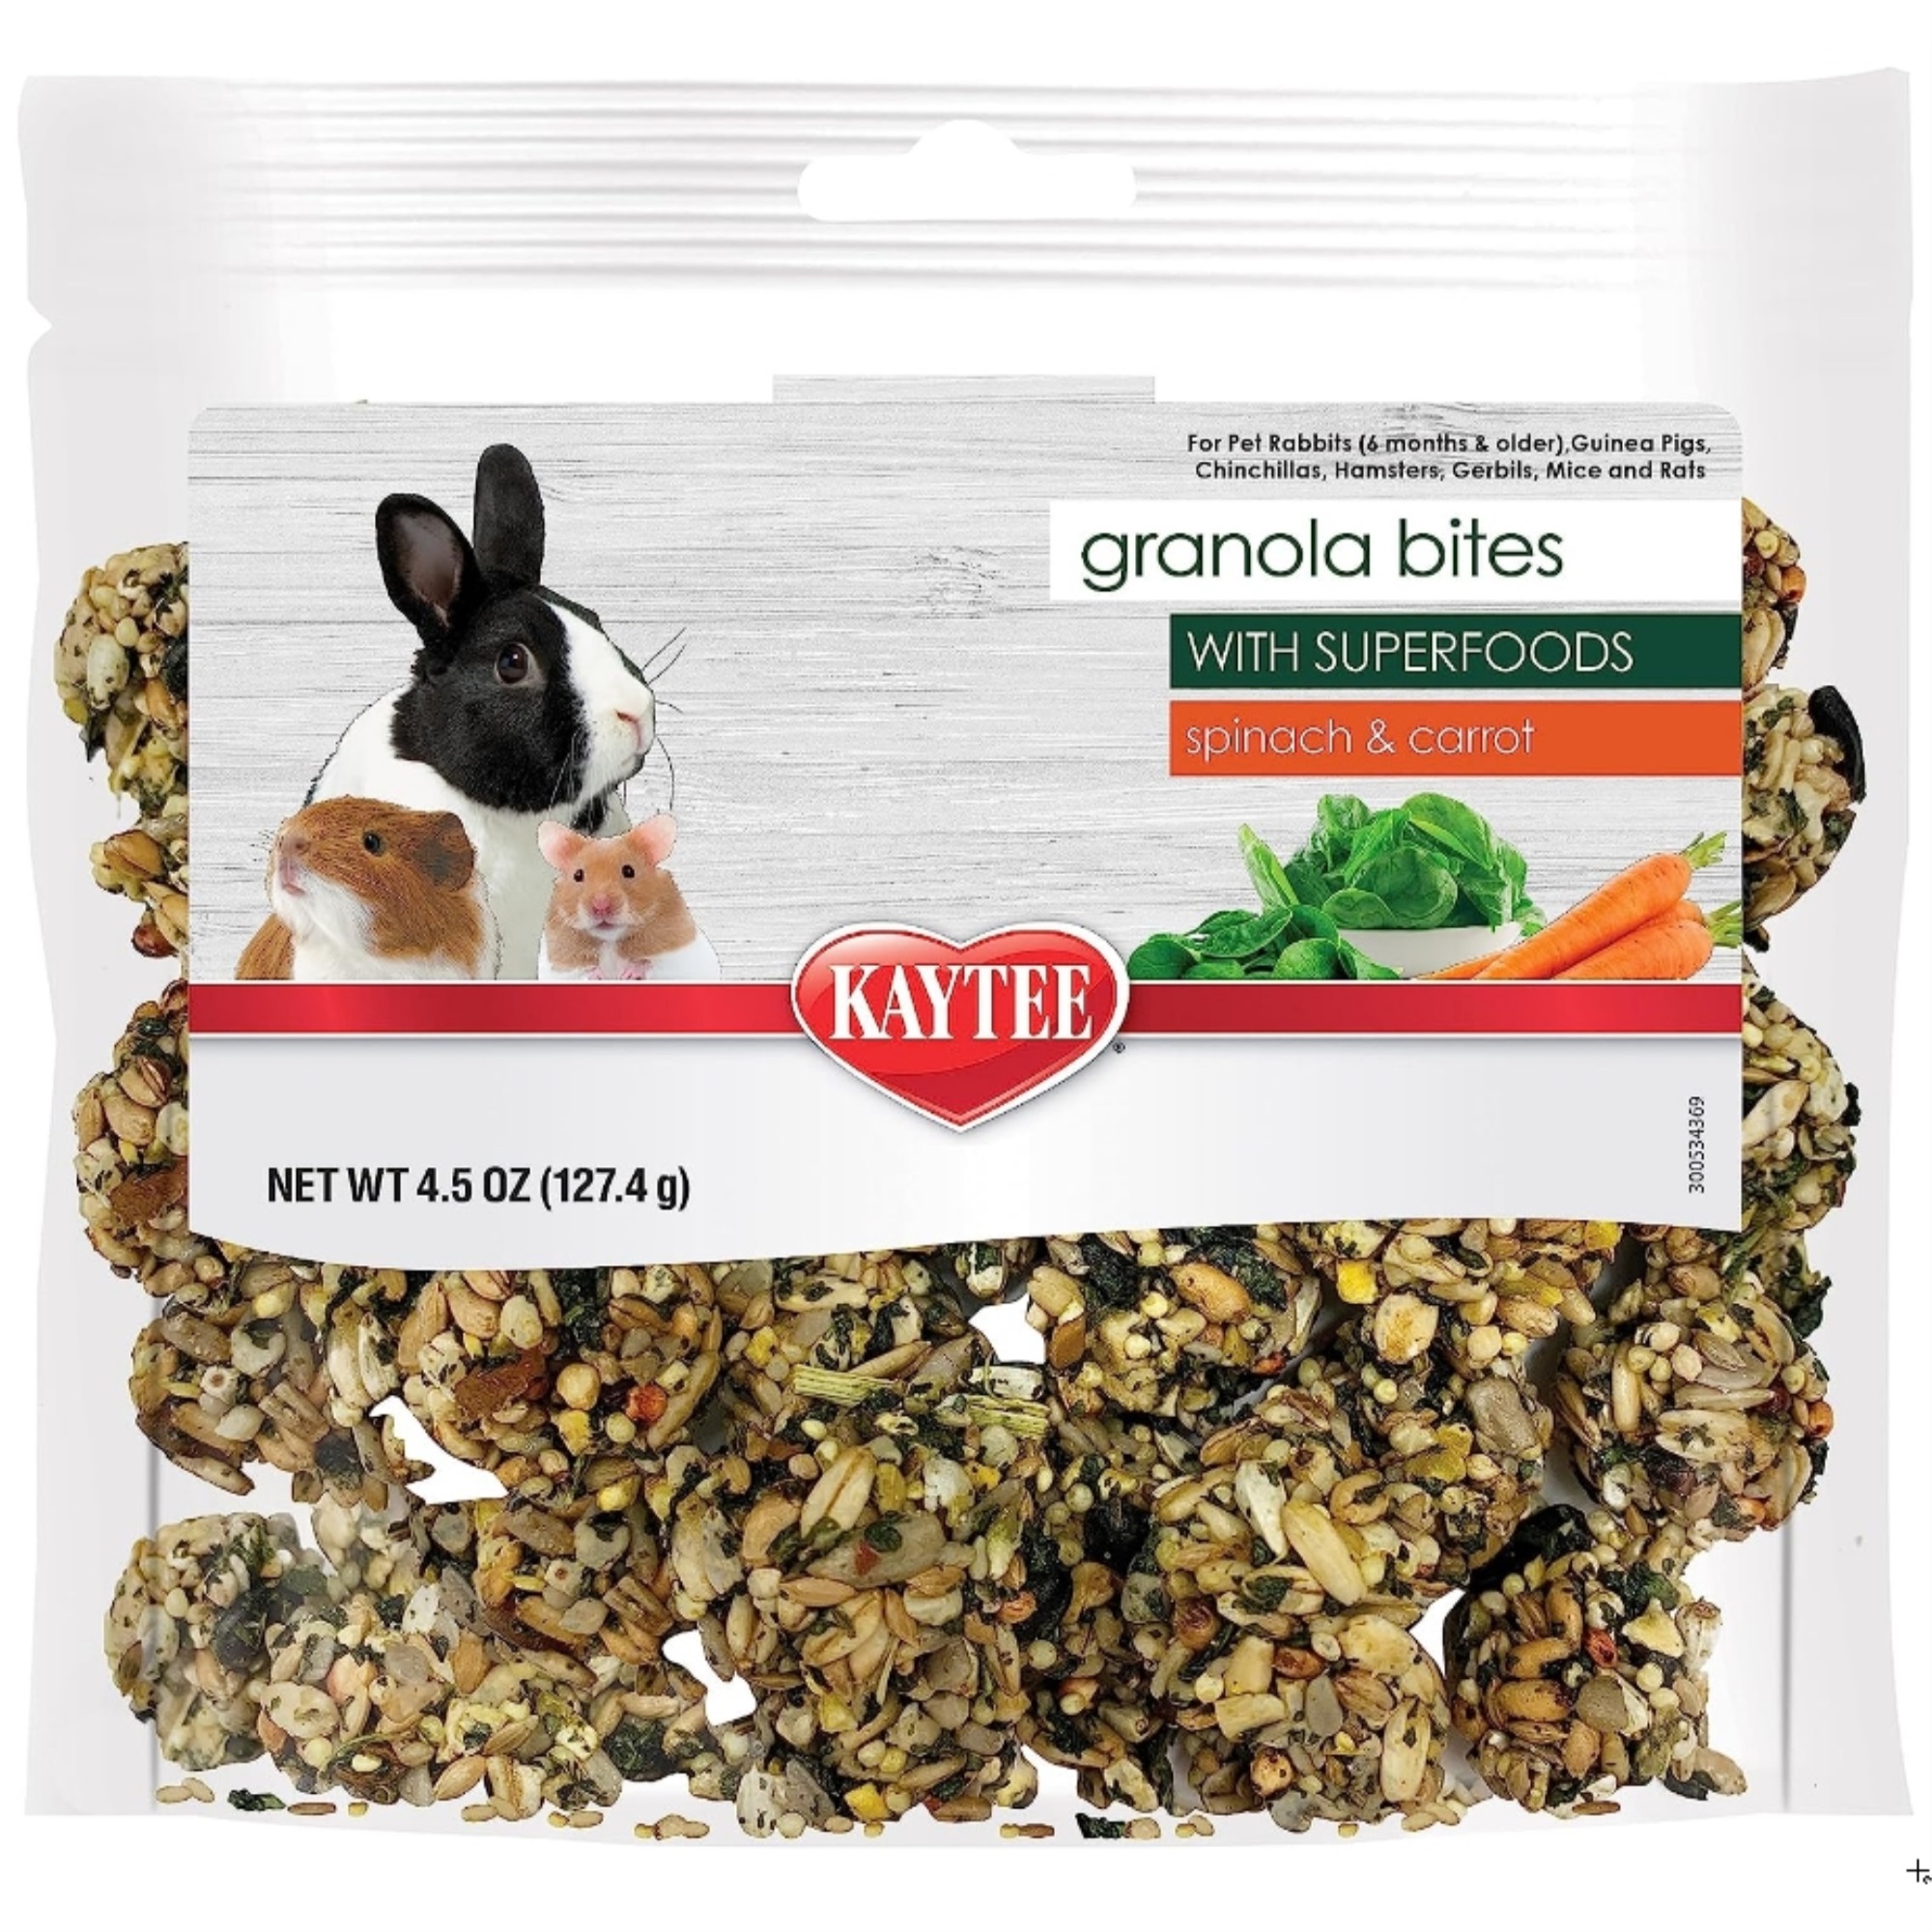 Kaytee Pet Products Kaytee Granola Bites with Super Foods Spinach and Carrot